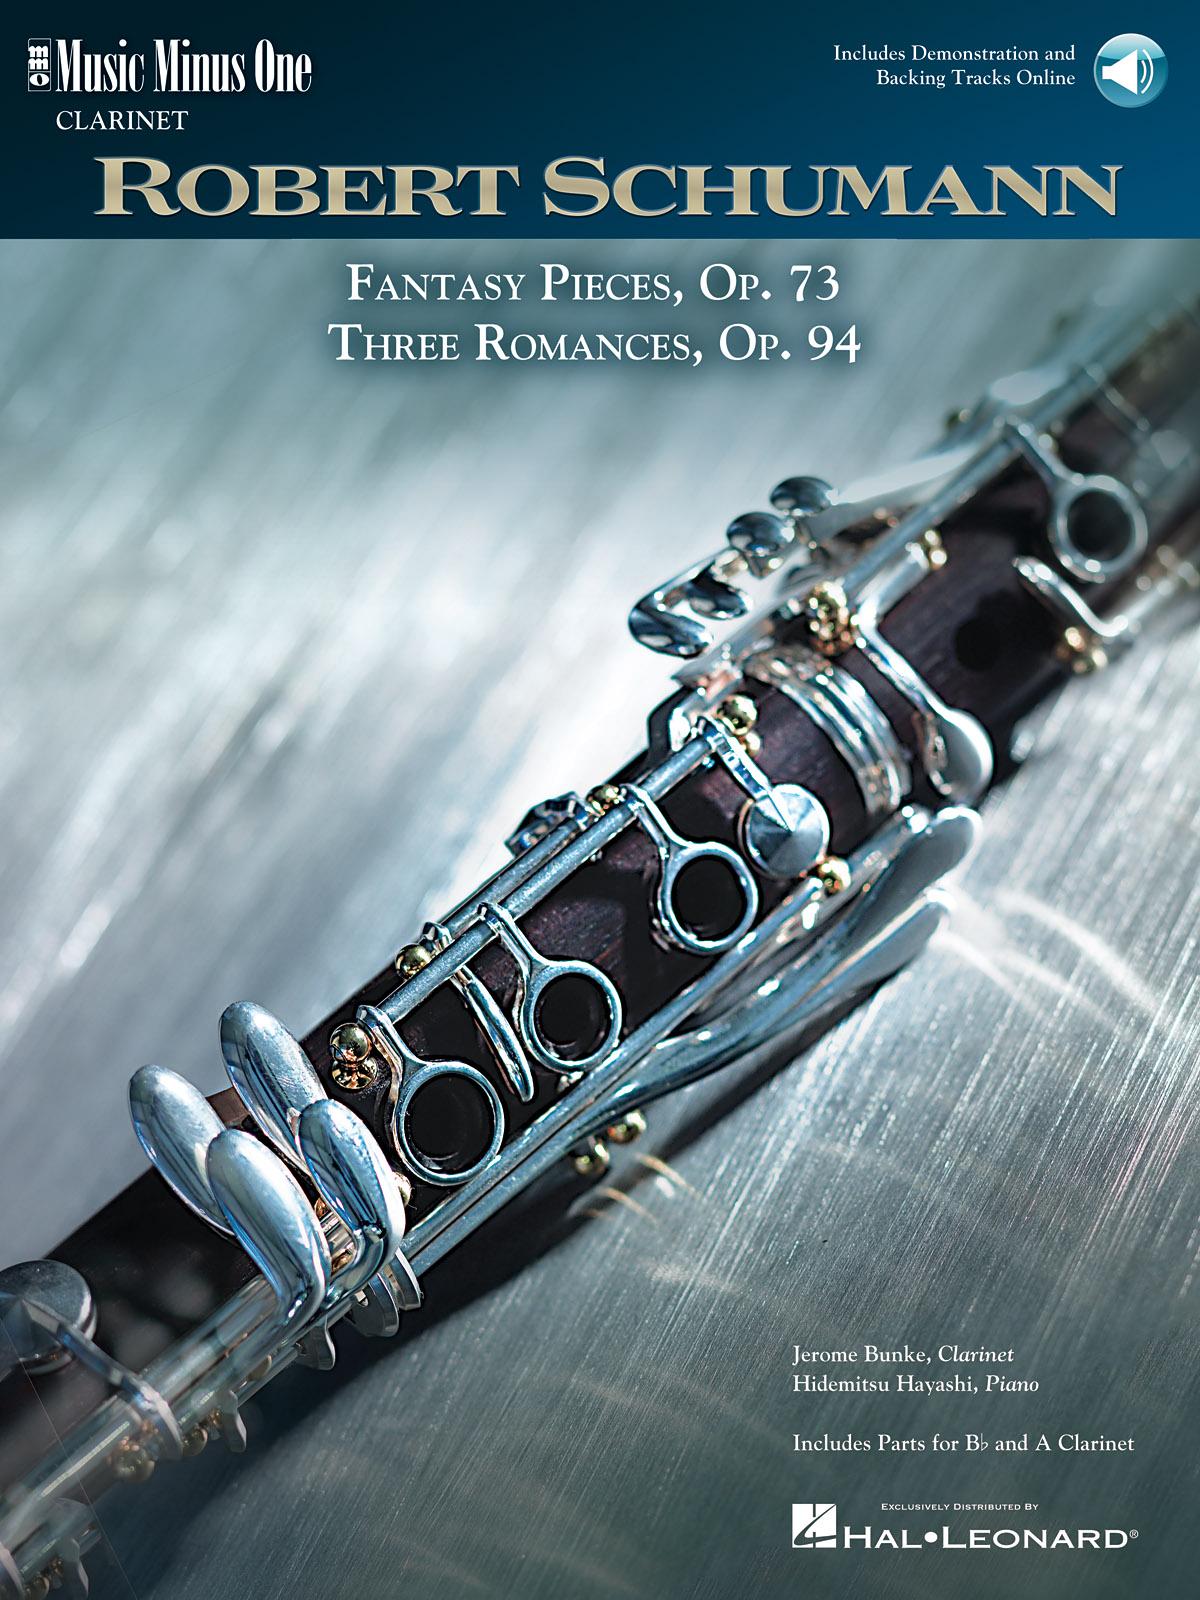 5 Fantasy Pieces, Op. 73 and 3 Romances, Op. 94 - Music Minus One Clarinet - noty na klarinet